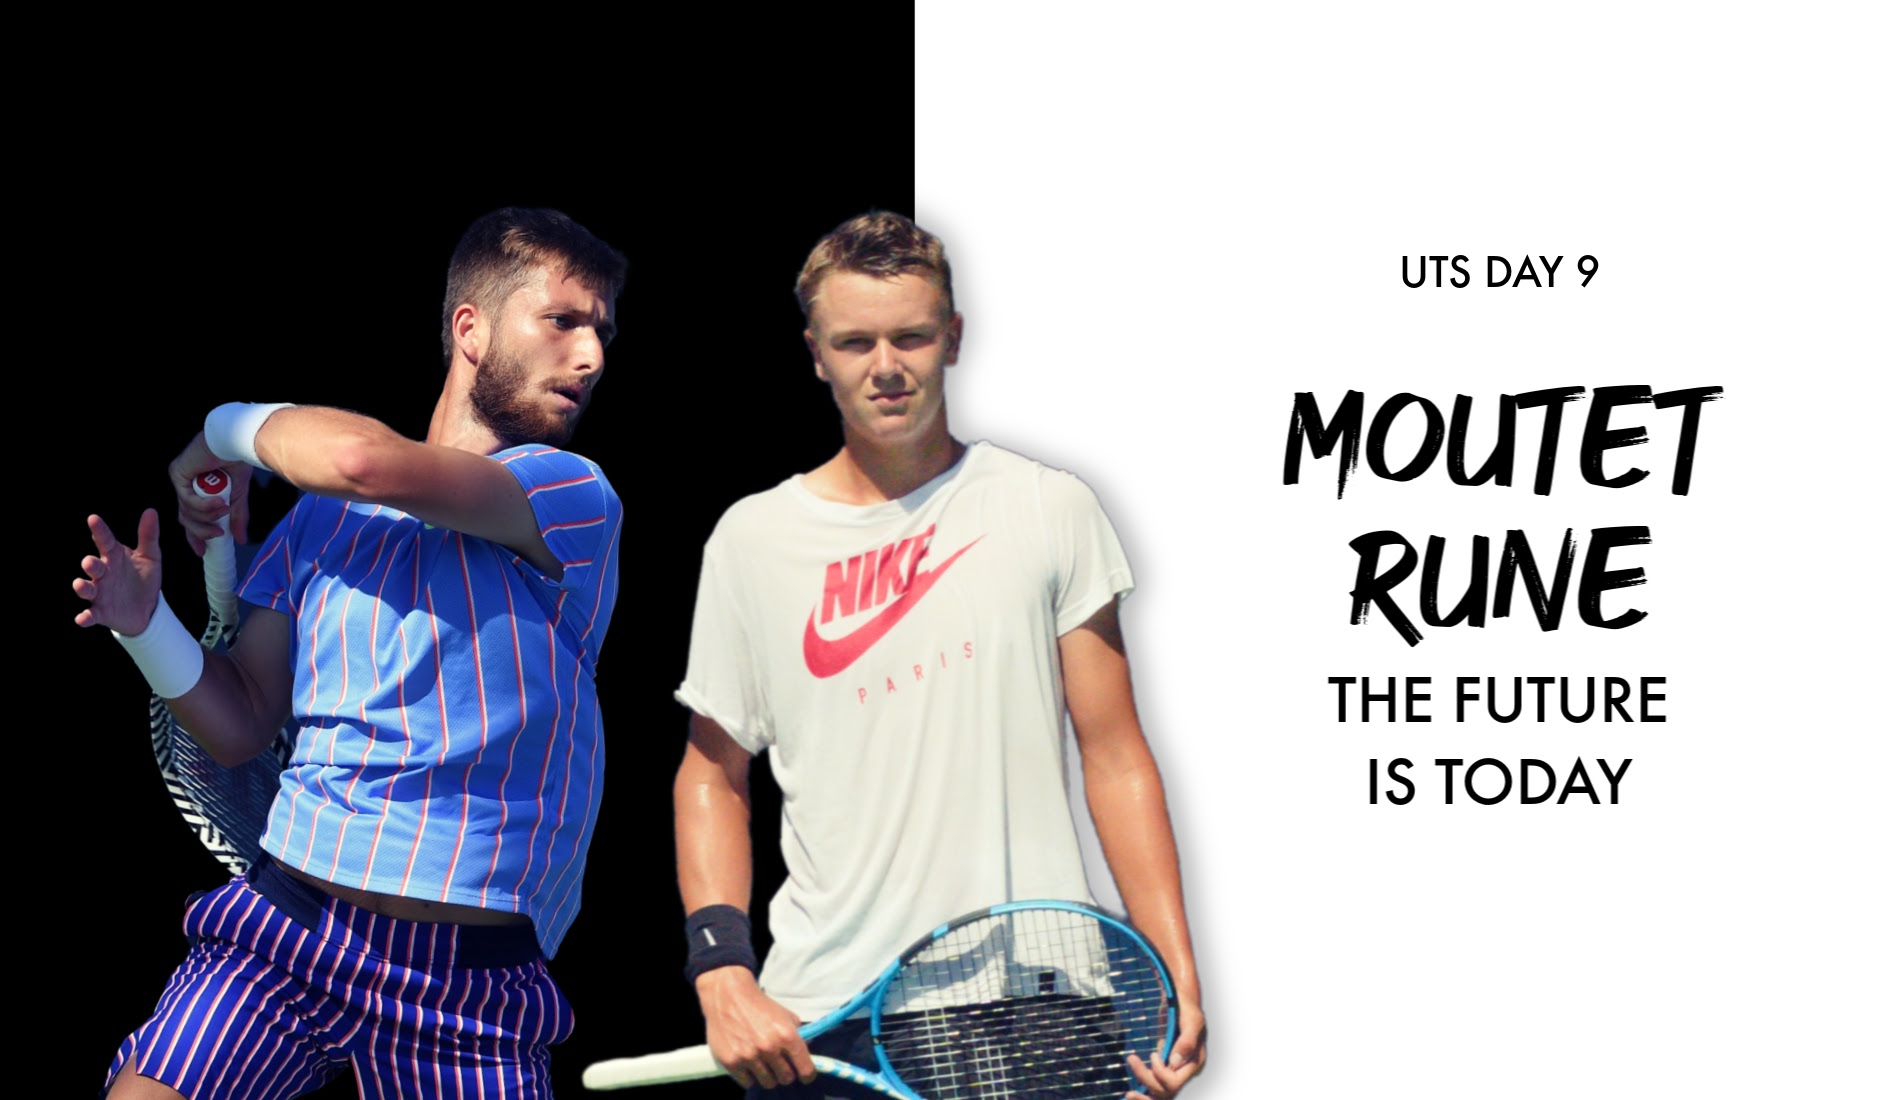 Moutet and Rune meet at UTS on SUnday